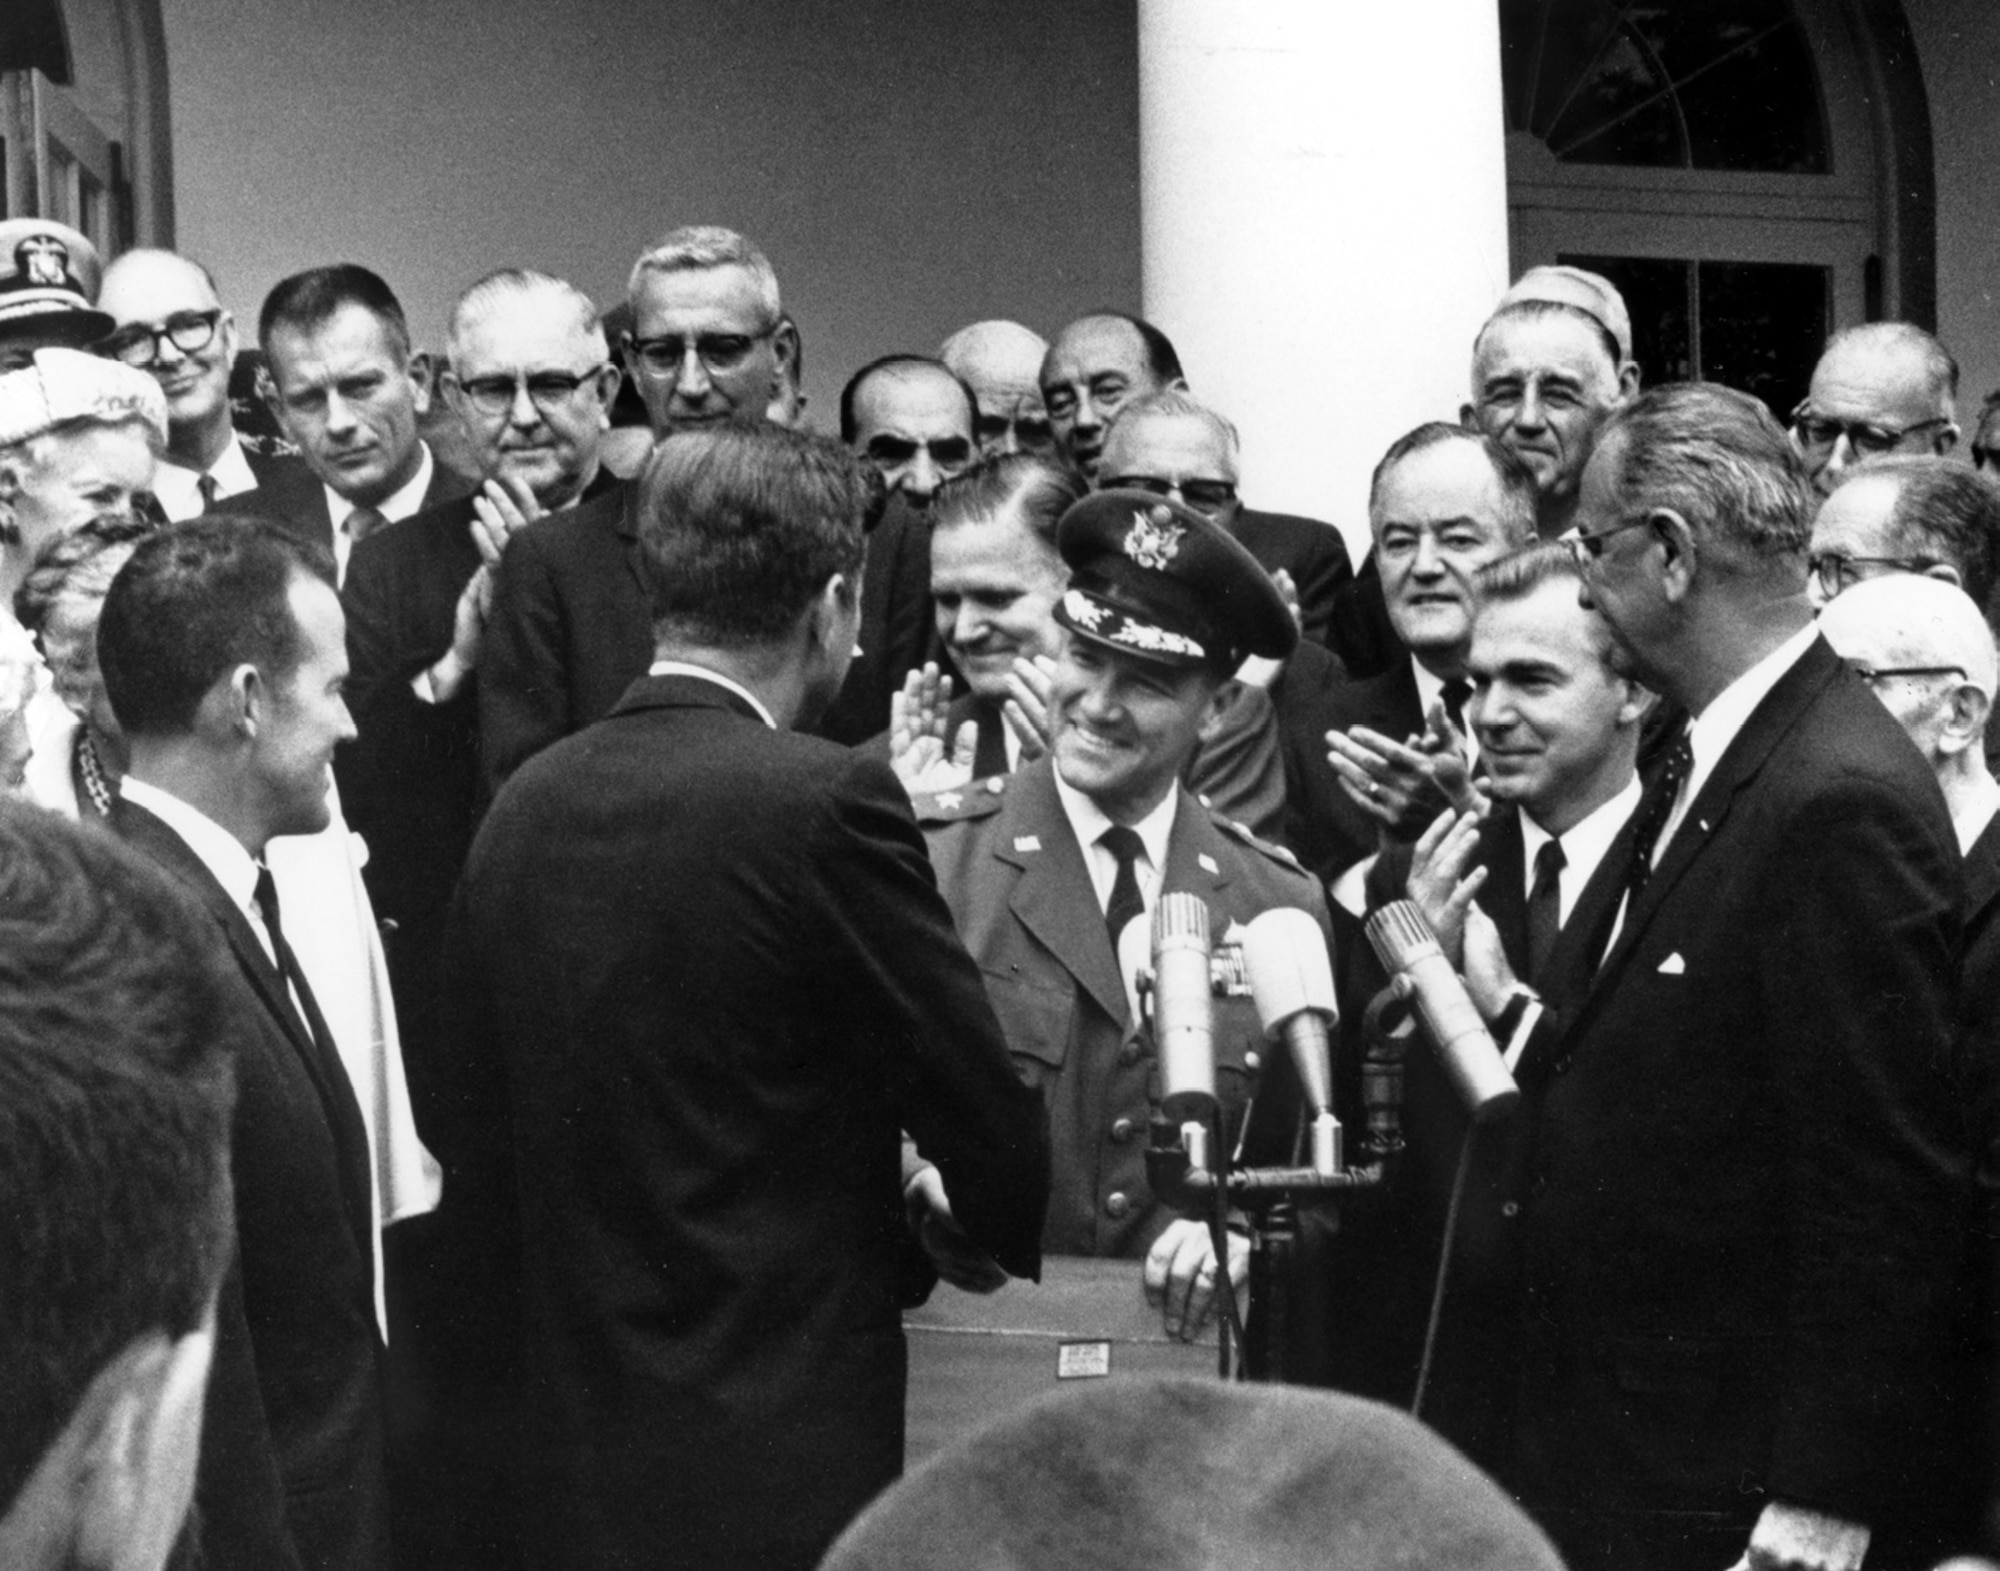 President John F. Kennedy presents Maj. Gen. Ben I. Funk with NASA's Space Achievement Award in a Rose Garden ceremony at the White House in 1963 as Mercury astronaut and Air Force Maj. Gordon Cooper, left, and vice president Lyndon B. Johnson, right, look on. Also recognizable in the photo are Mercury astronaut and Air Force Maj. Donald K. Deke Slayton, directly above Cooper, NASA Administrator James Webb, behind and to the left of Gen. Funk, and Senator Hubert H. Humphrey, behind and to the right of Gen. Funk. (U.S. Air Force photo)